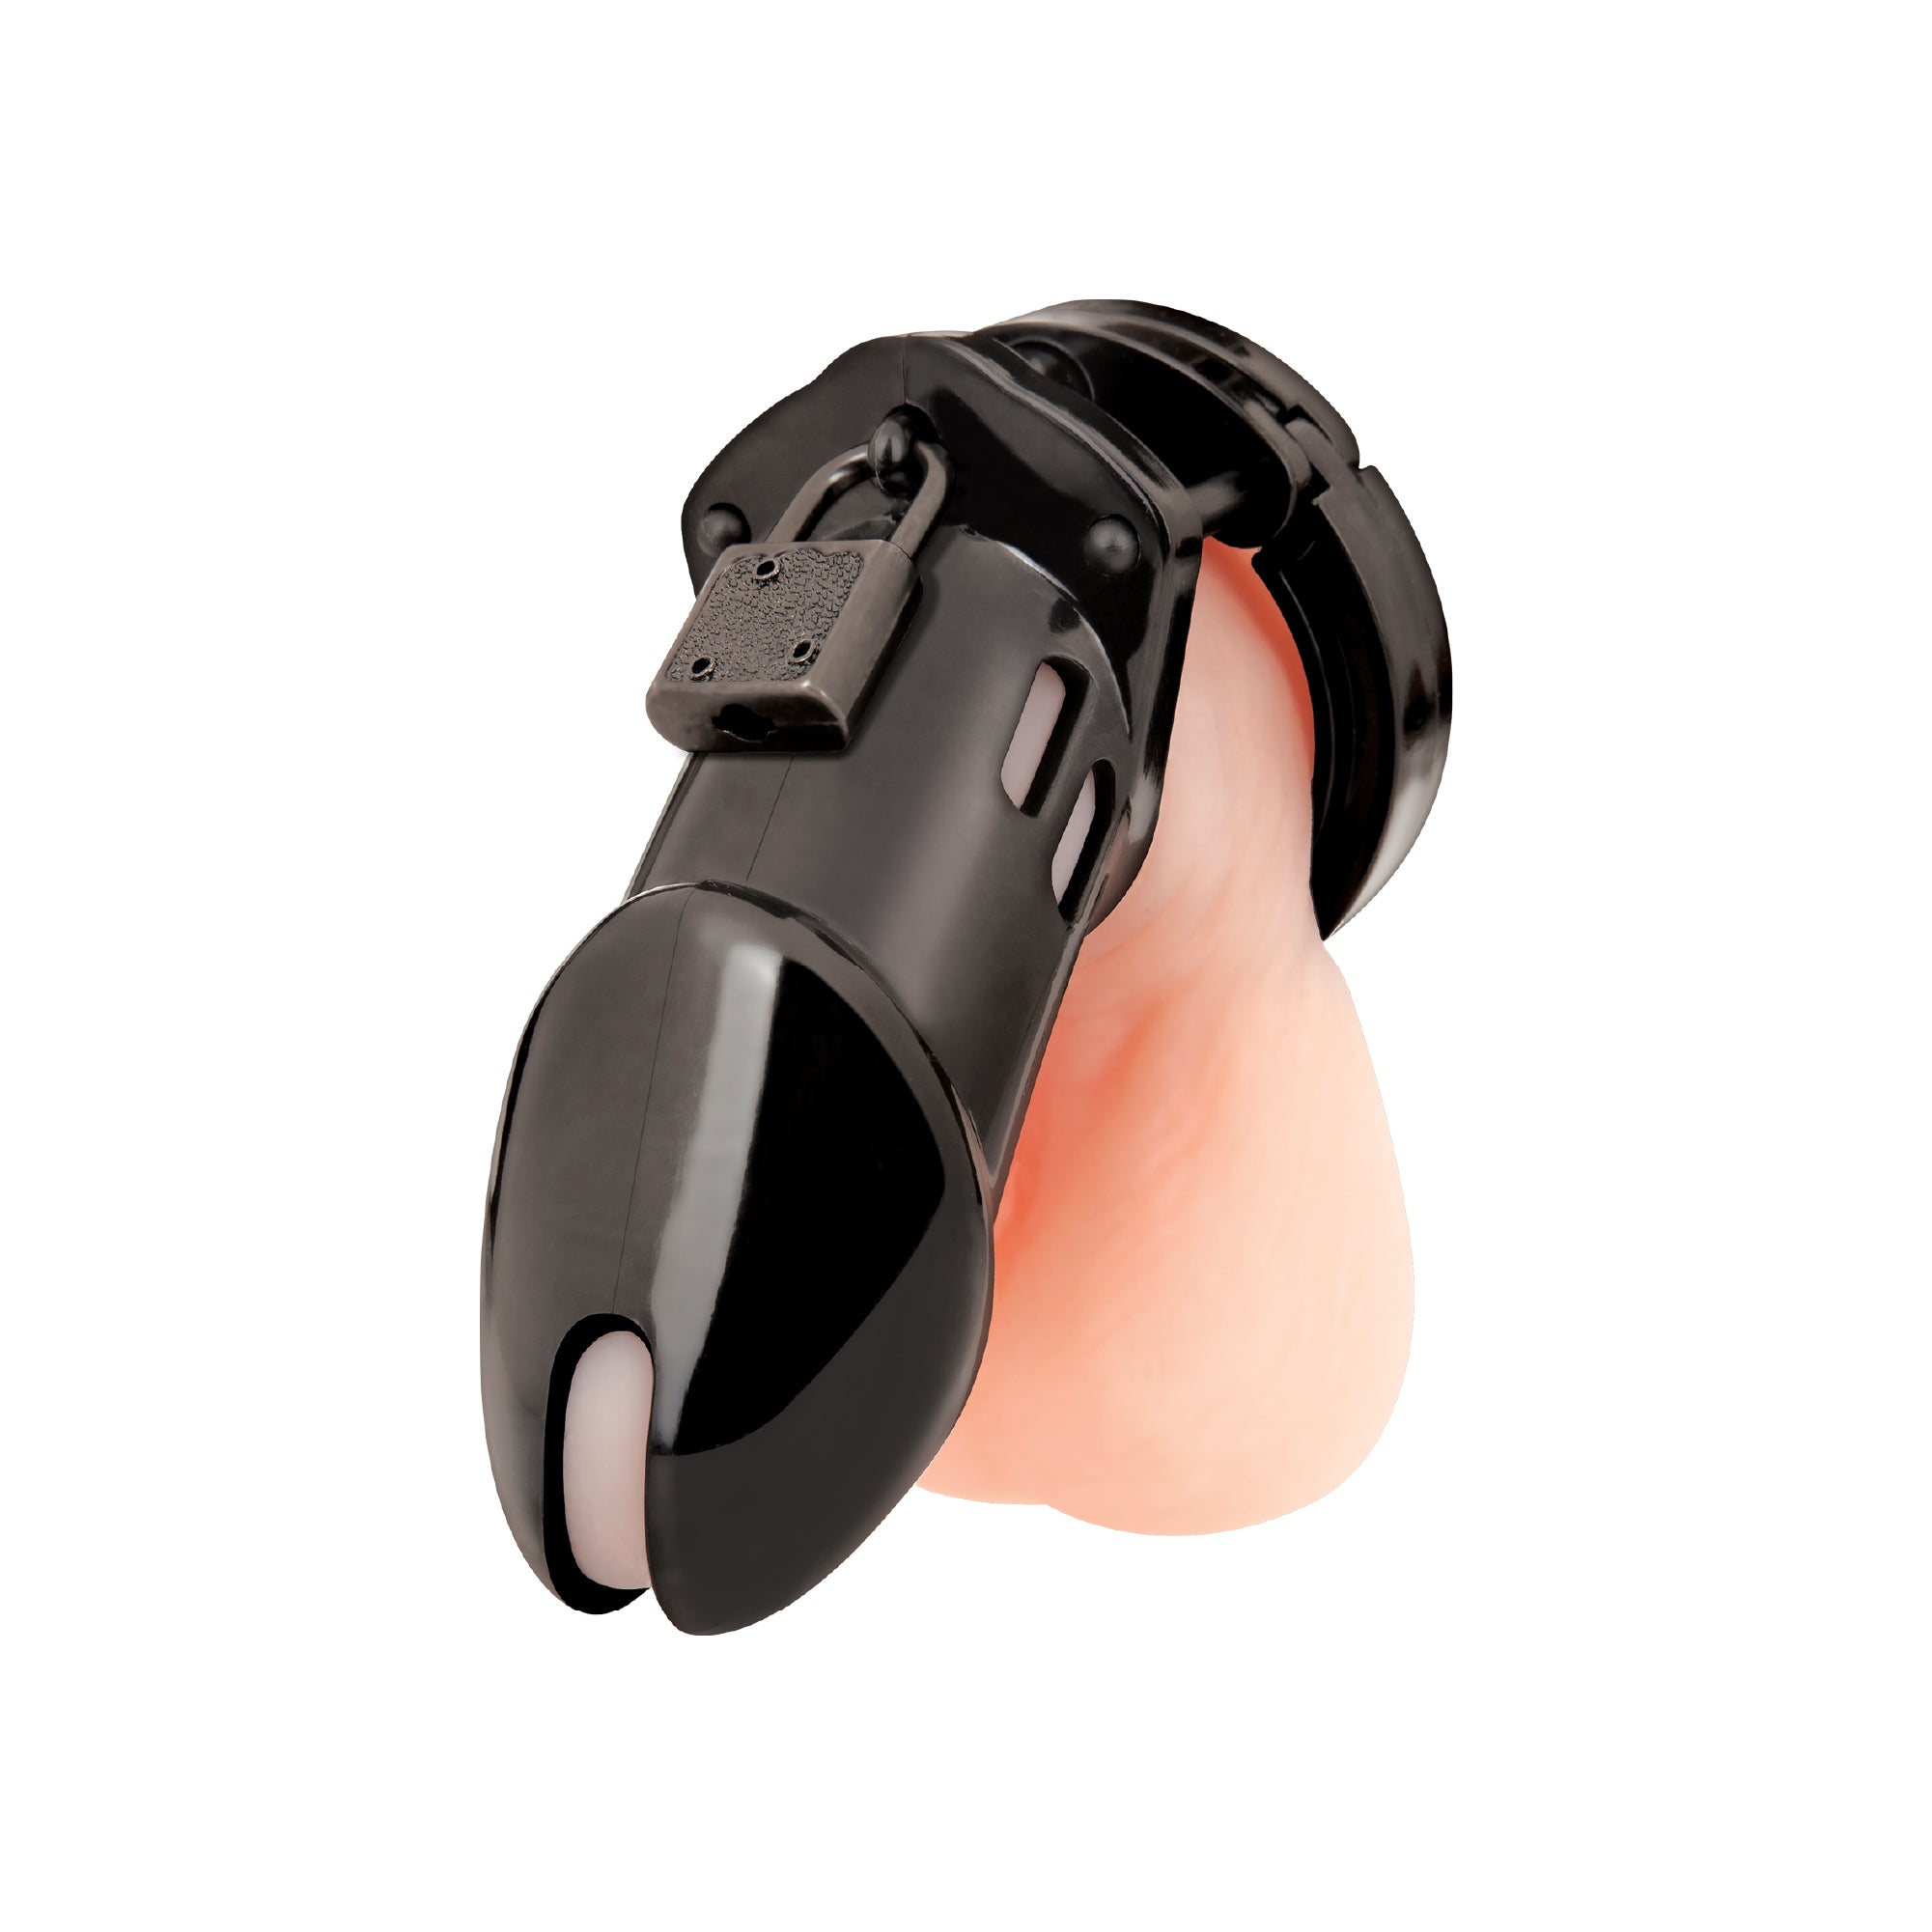 Acrylic See-thru Chastity Cock Cage - Black